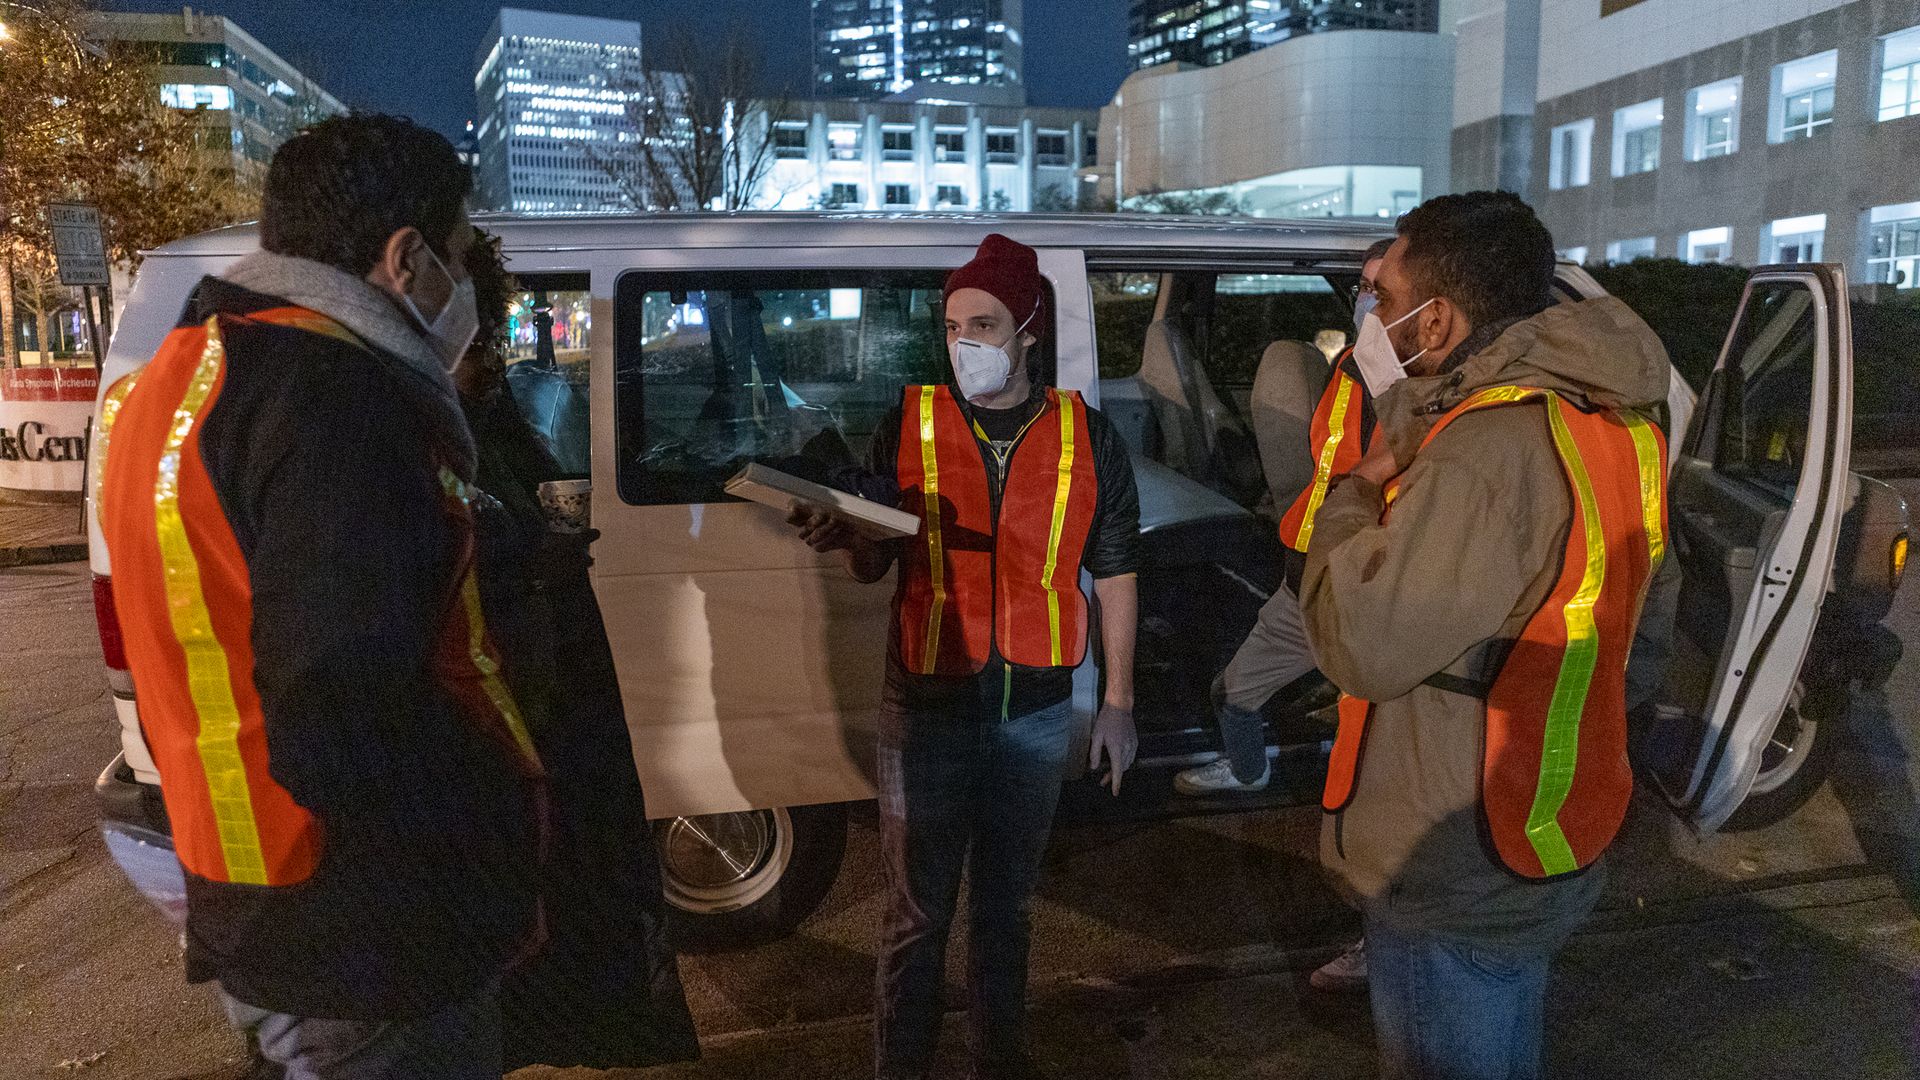 Several people wearing Covid masks and reflective vests stand in front of a white van at night before conducting a census of homeless people